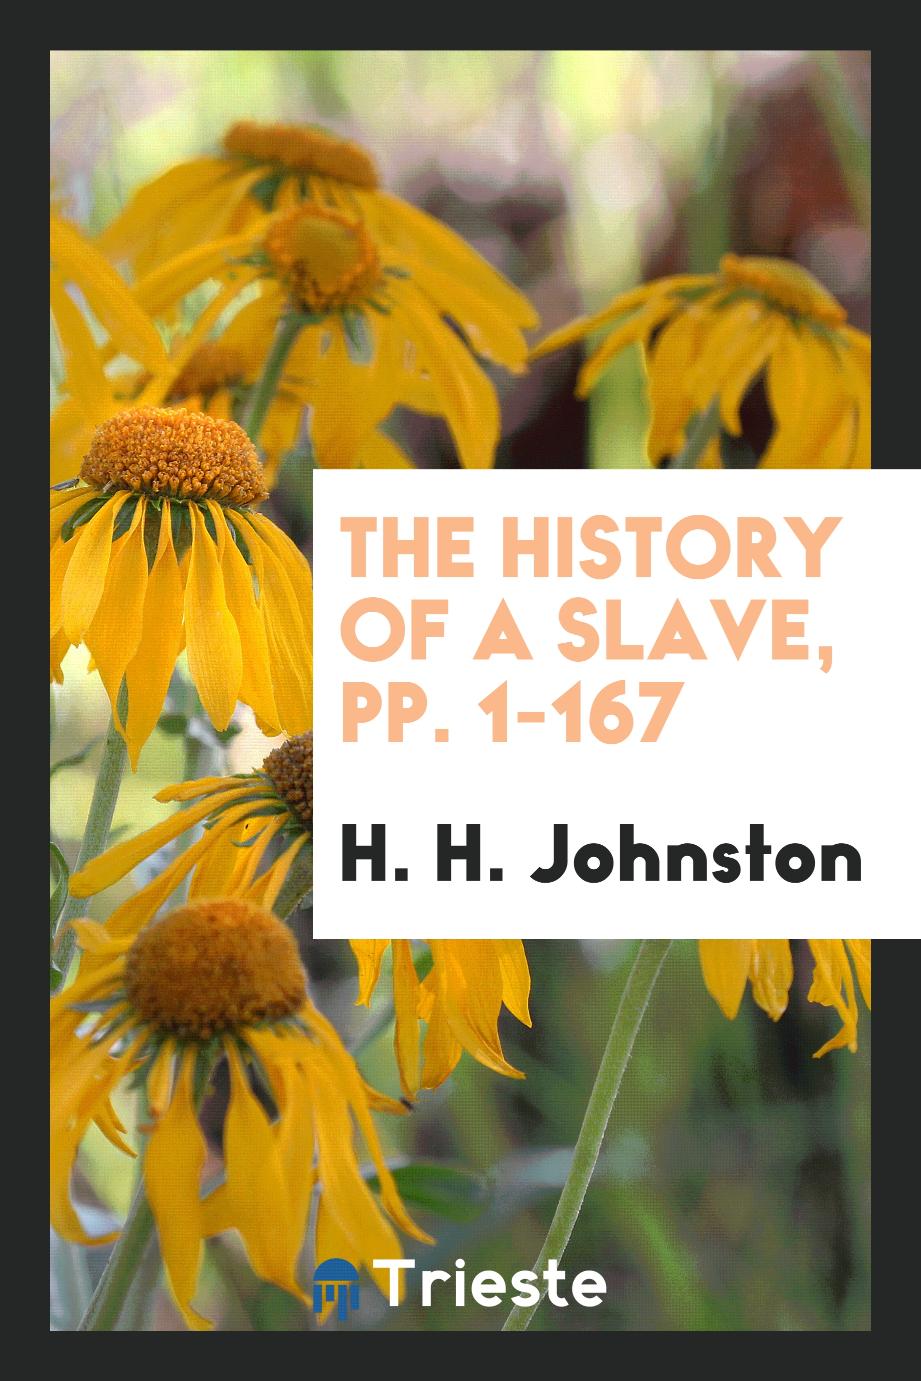 The History of a Slave, pp. 1-167